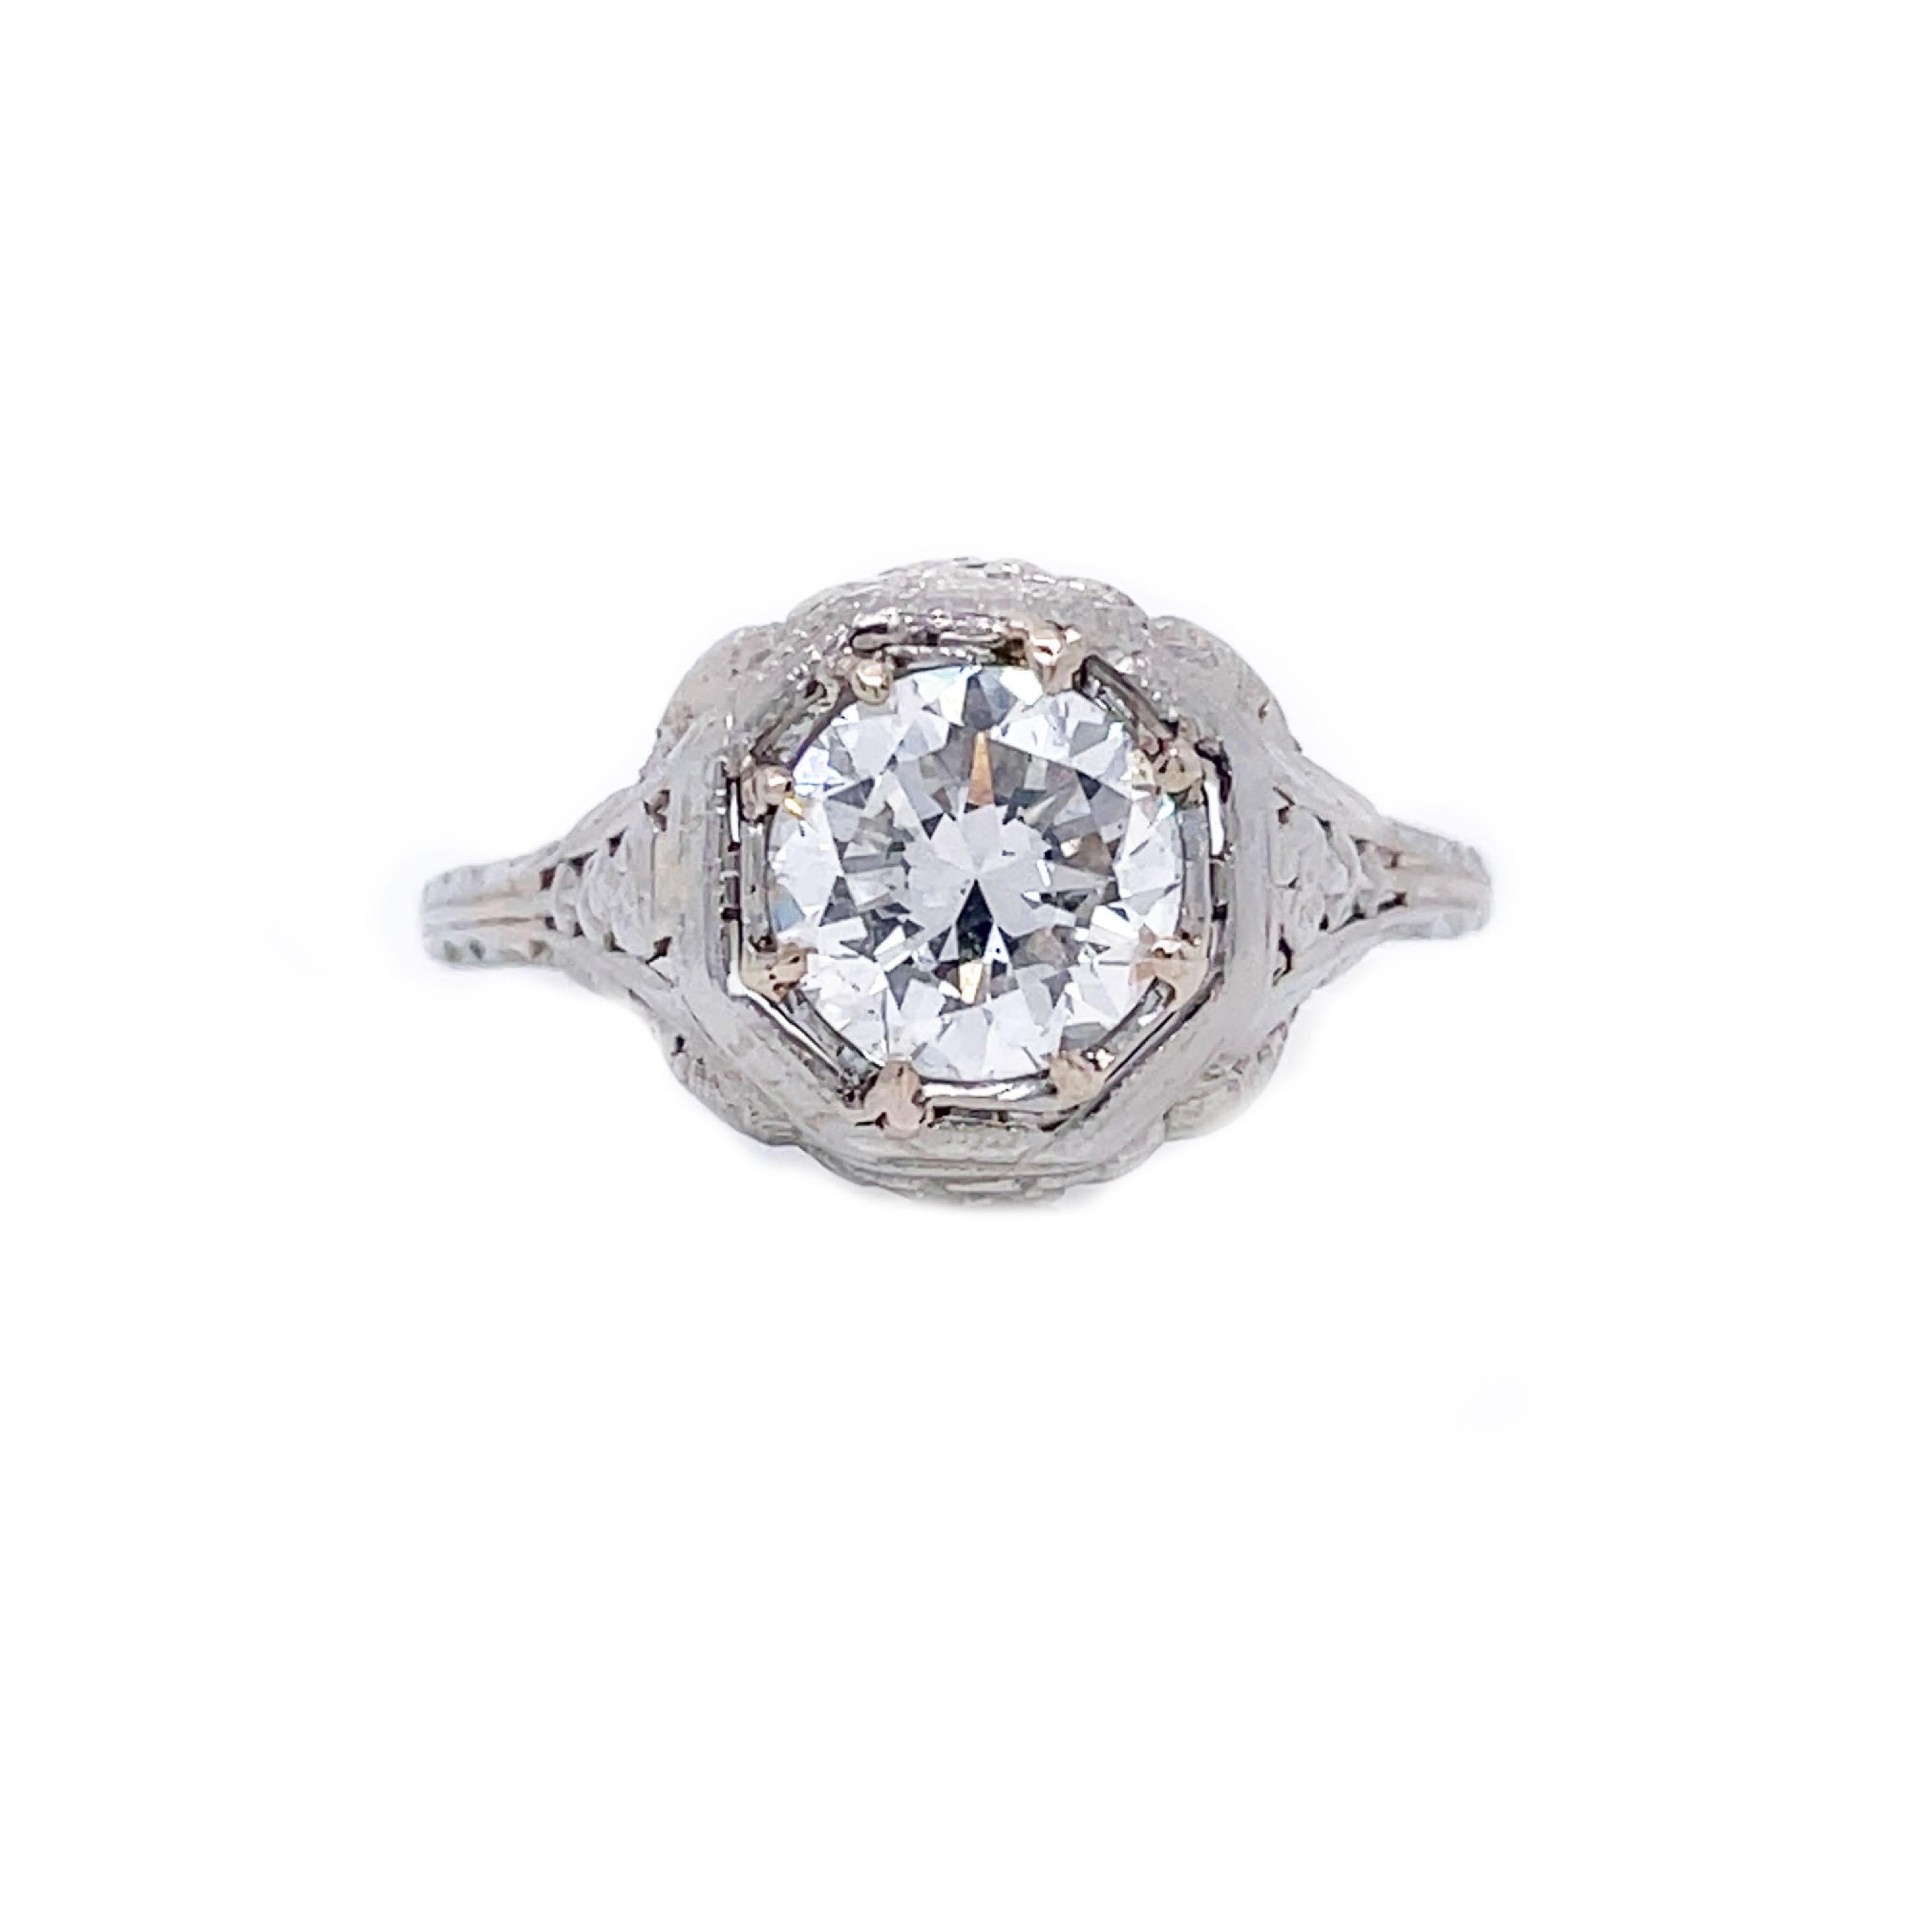 This is a breathtaking 18K white gold ring from the 1920s that showcases gorgeous filigree and a stunning bright white diamond! Eight prongs secure an icy white diamond that is sure to wow and is accompanied by a GIA report. This utterly charming